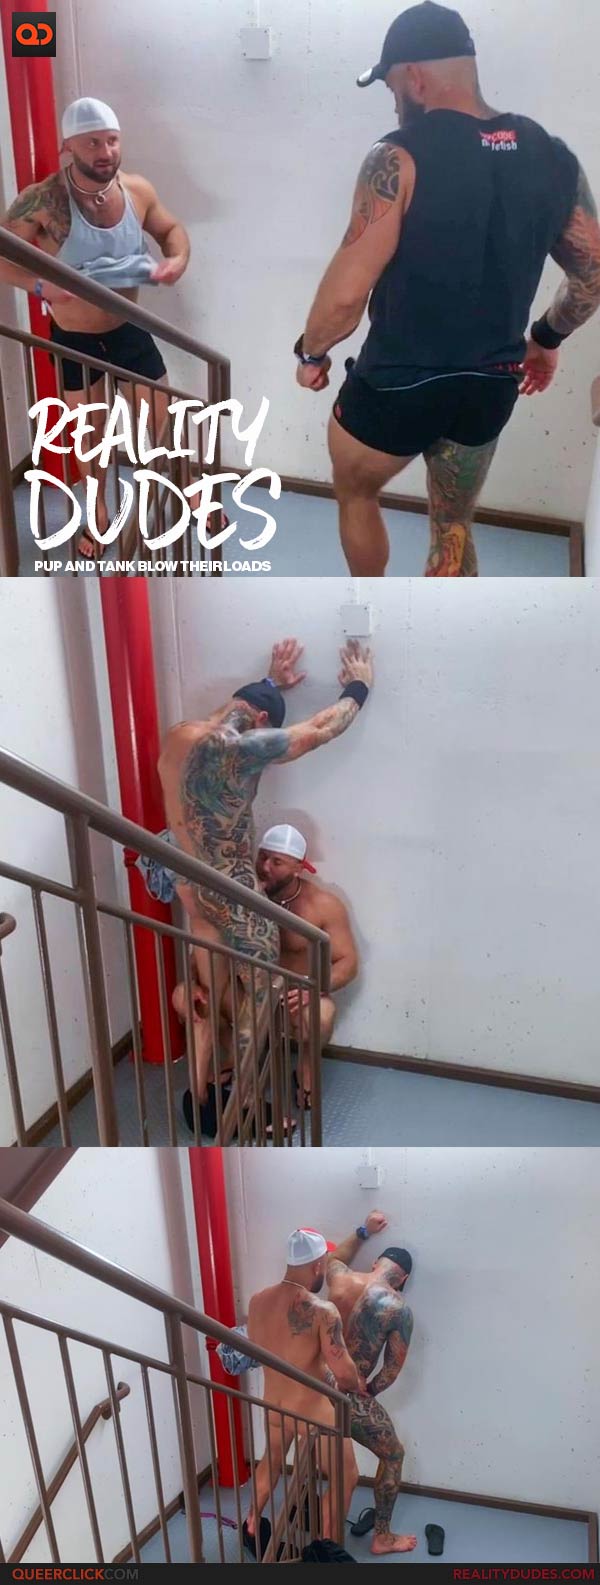 Reality Dudes: Pup and Tank Blow Their Loads in(on?) a Stairwell